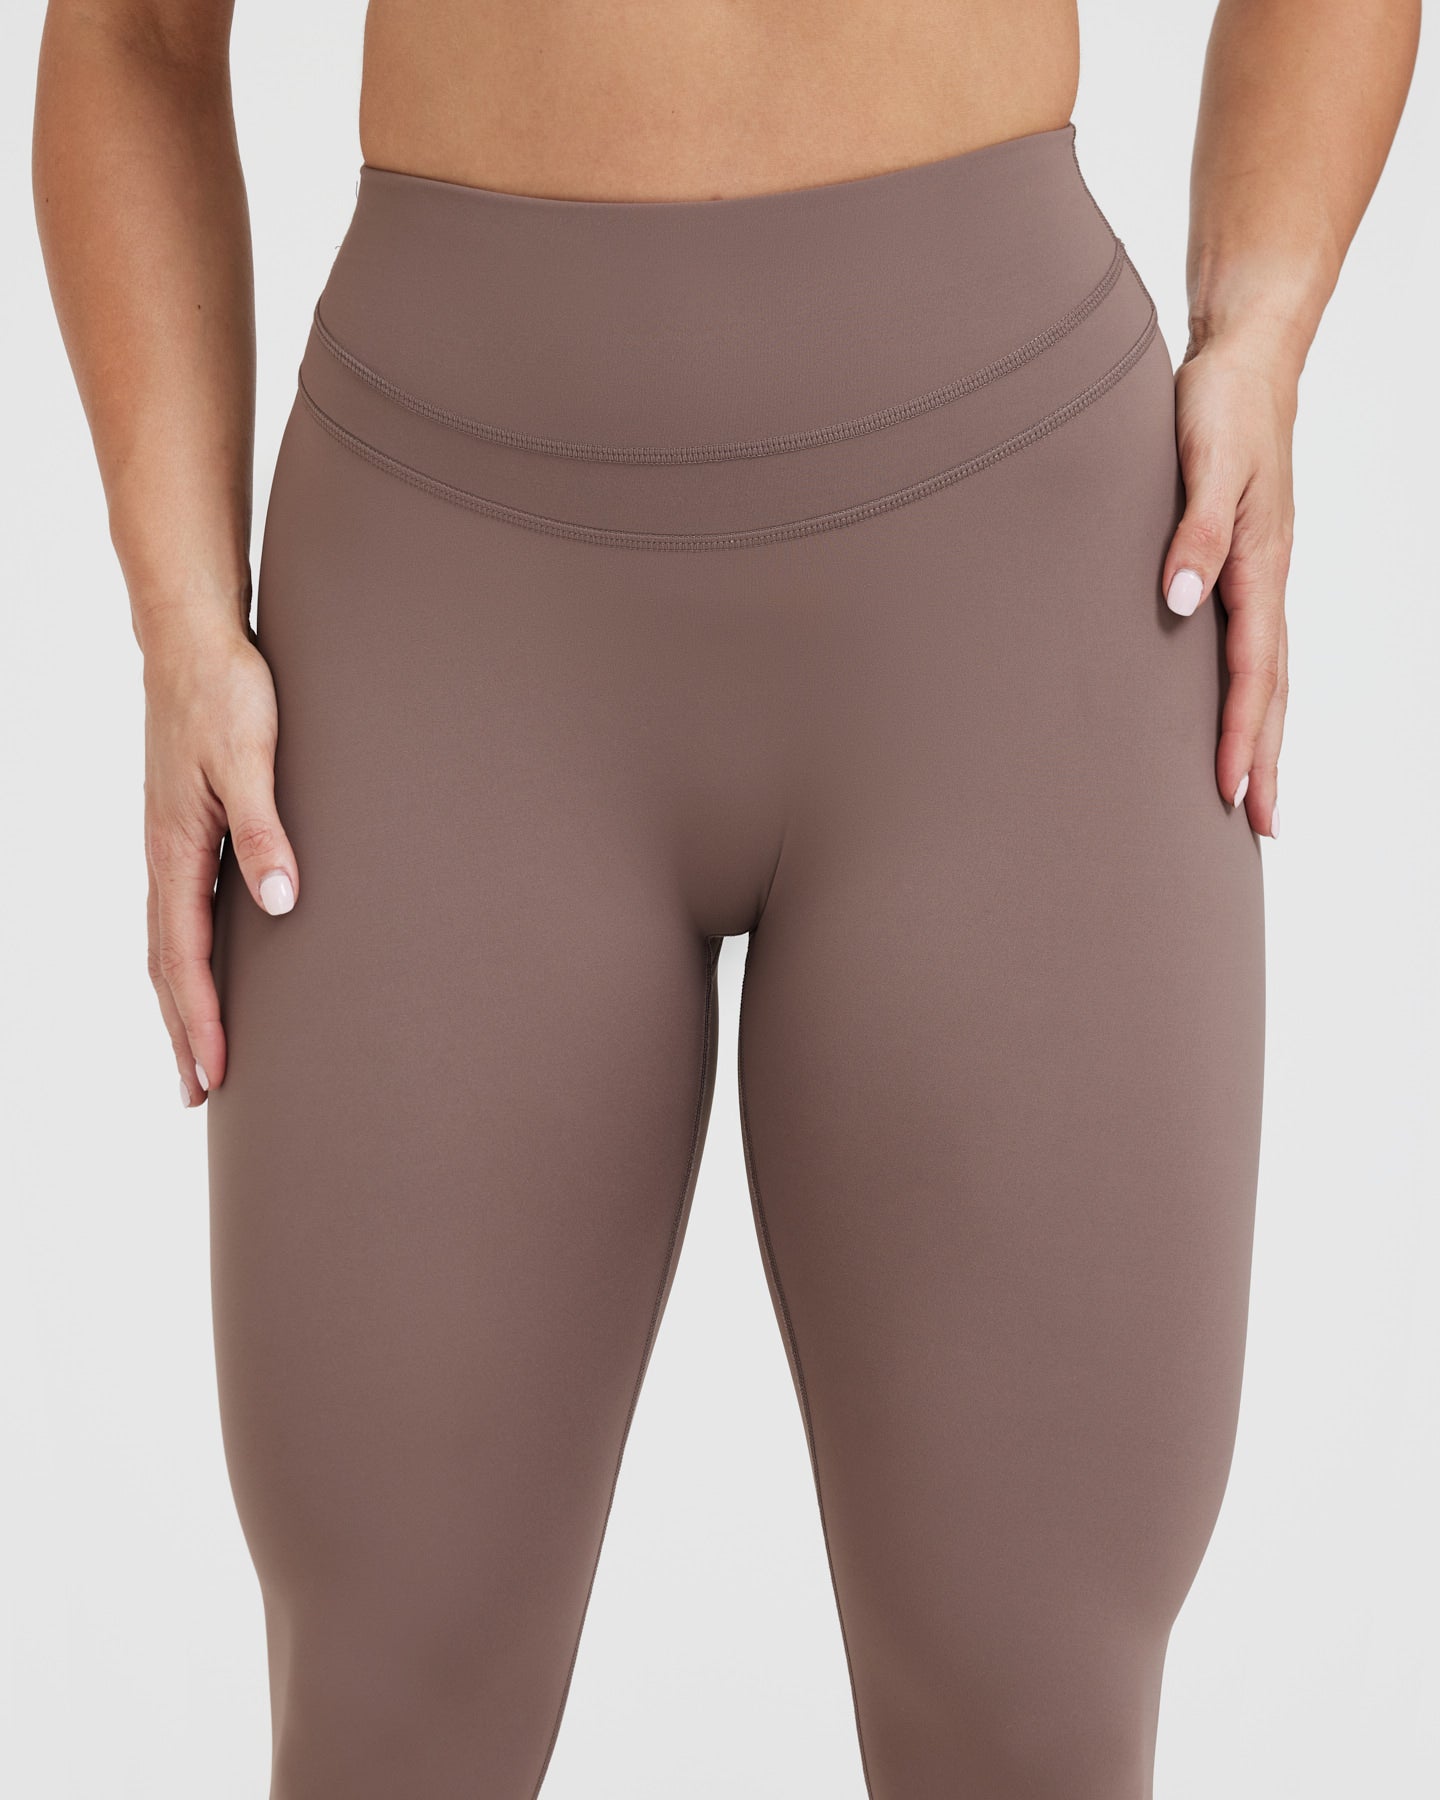 Ultra High Waisted Leggings - Brown – My Outfit Online